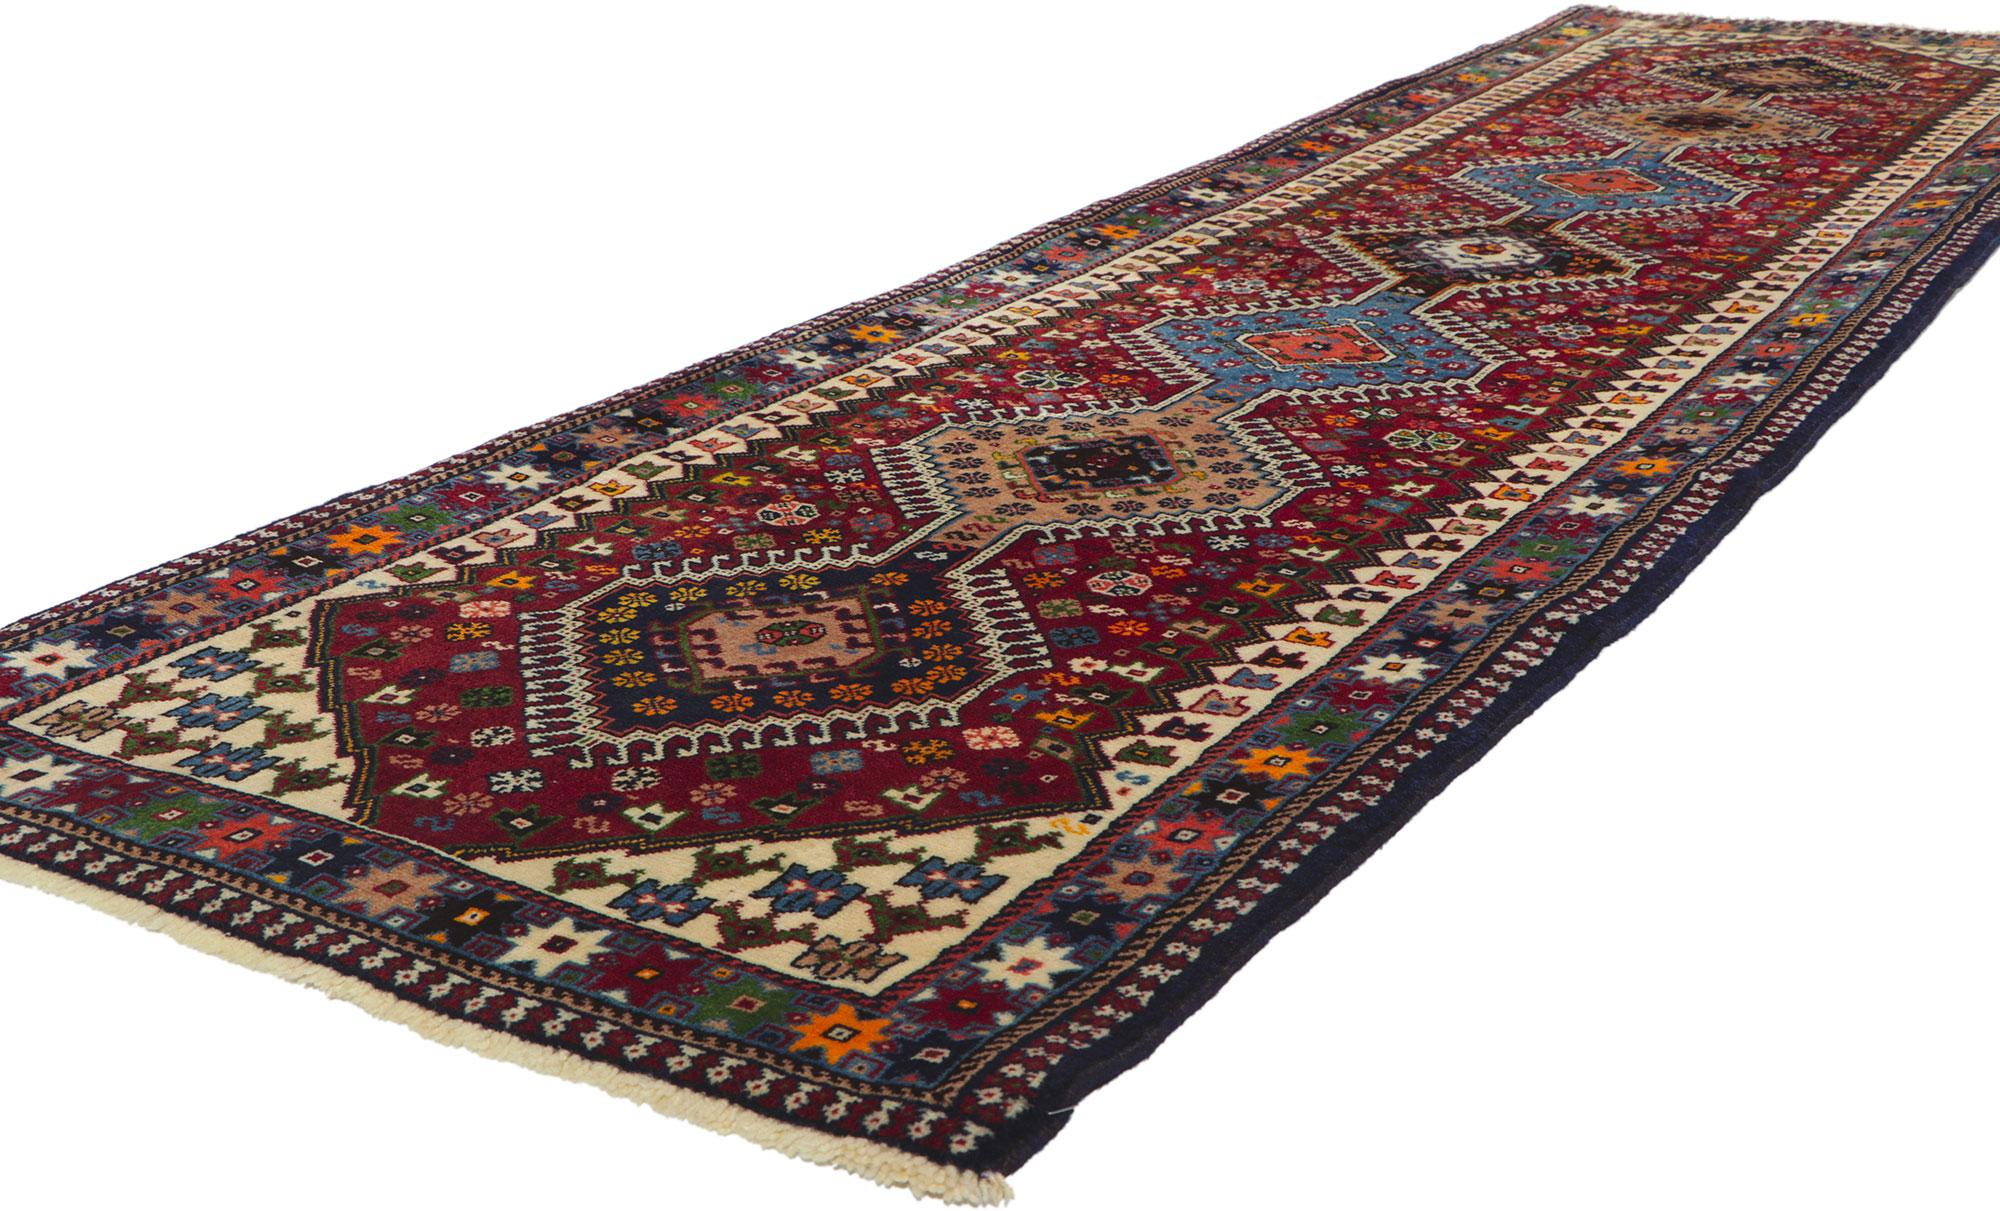 61044 Vintage Persian Shiraz Rug Runner, 02'10 x 10'07. Embark on an evocative journey as you delve into the rich embrace of this hand-knotted wool vintage Persian Shiraz rug. Envision the rugged artisan, skillfully weaving tribal enchantment into